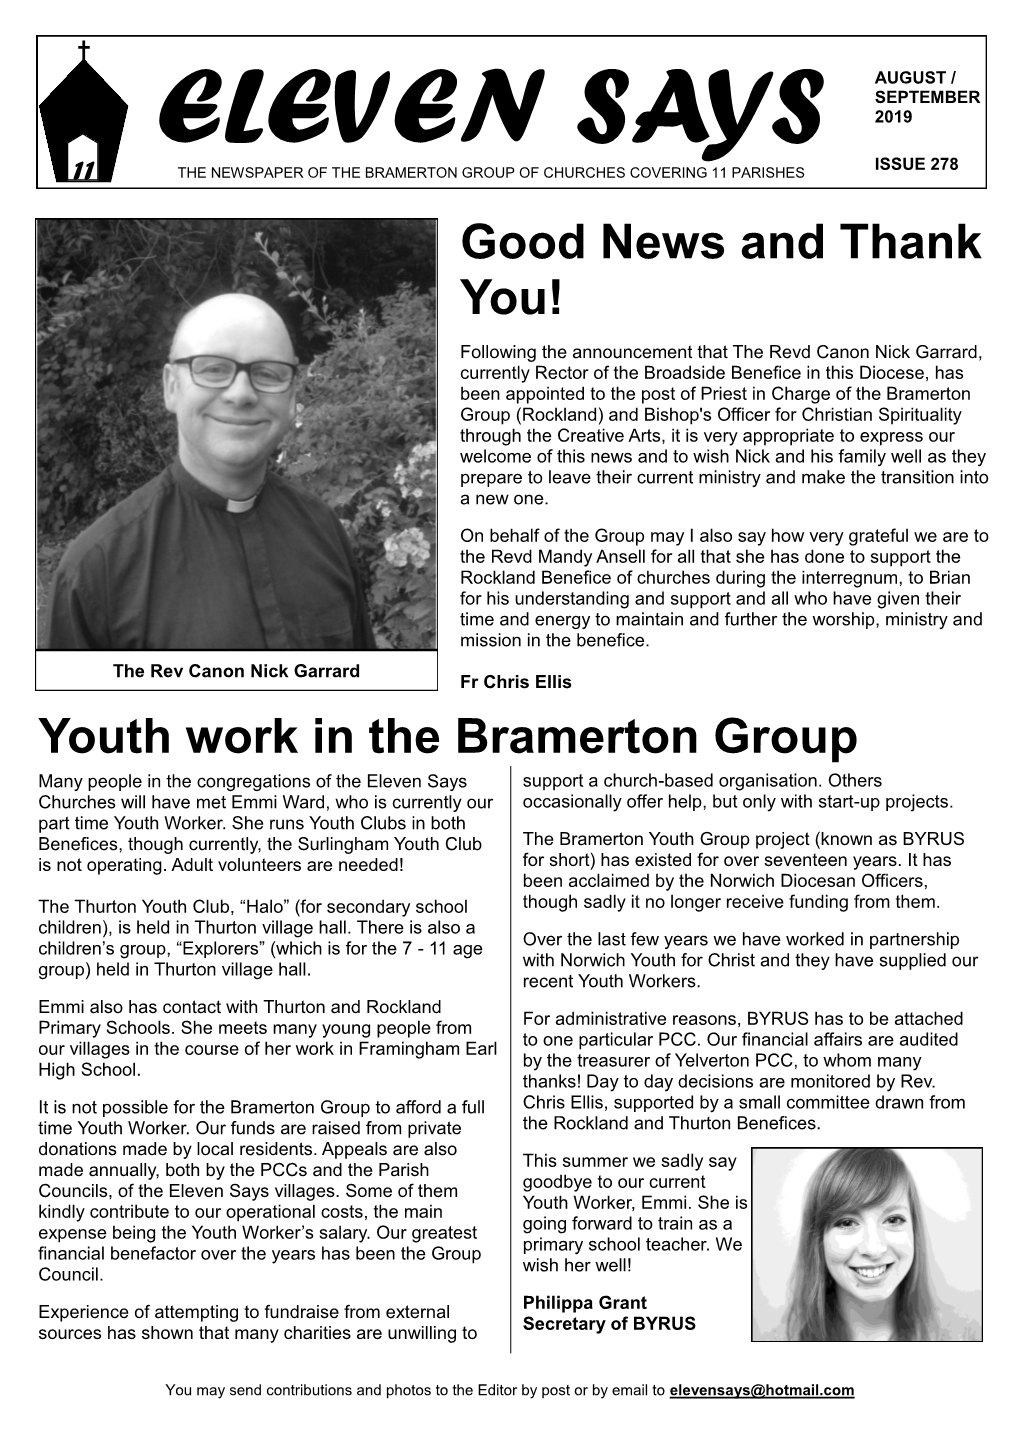 Youth Work in the Bramerton Group Good News and Thank You!